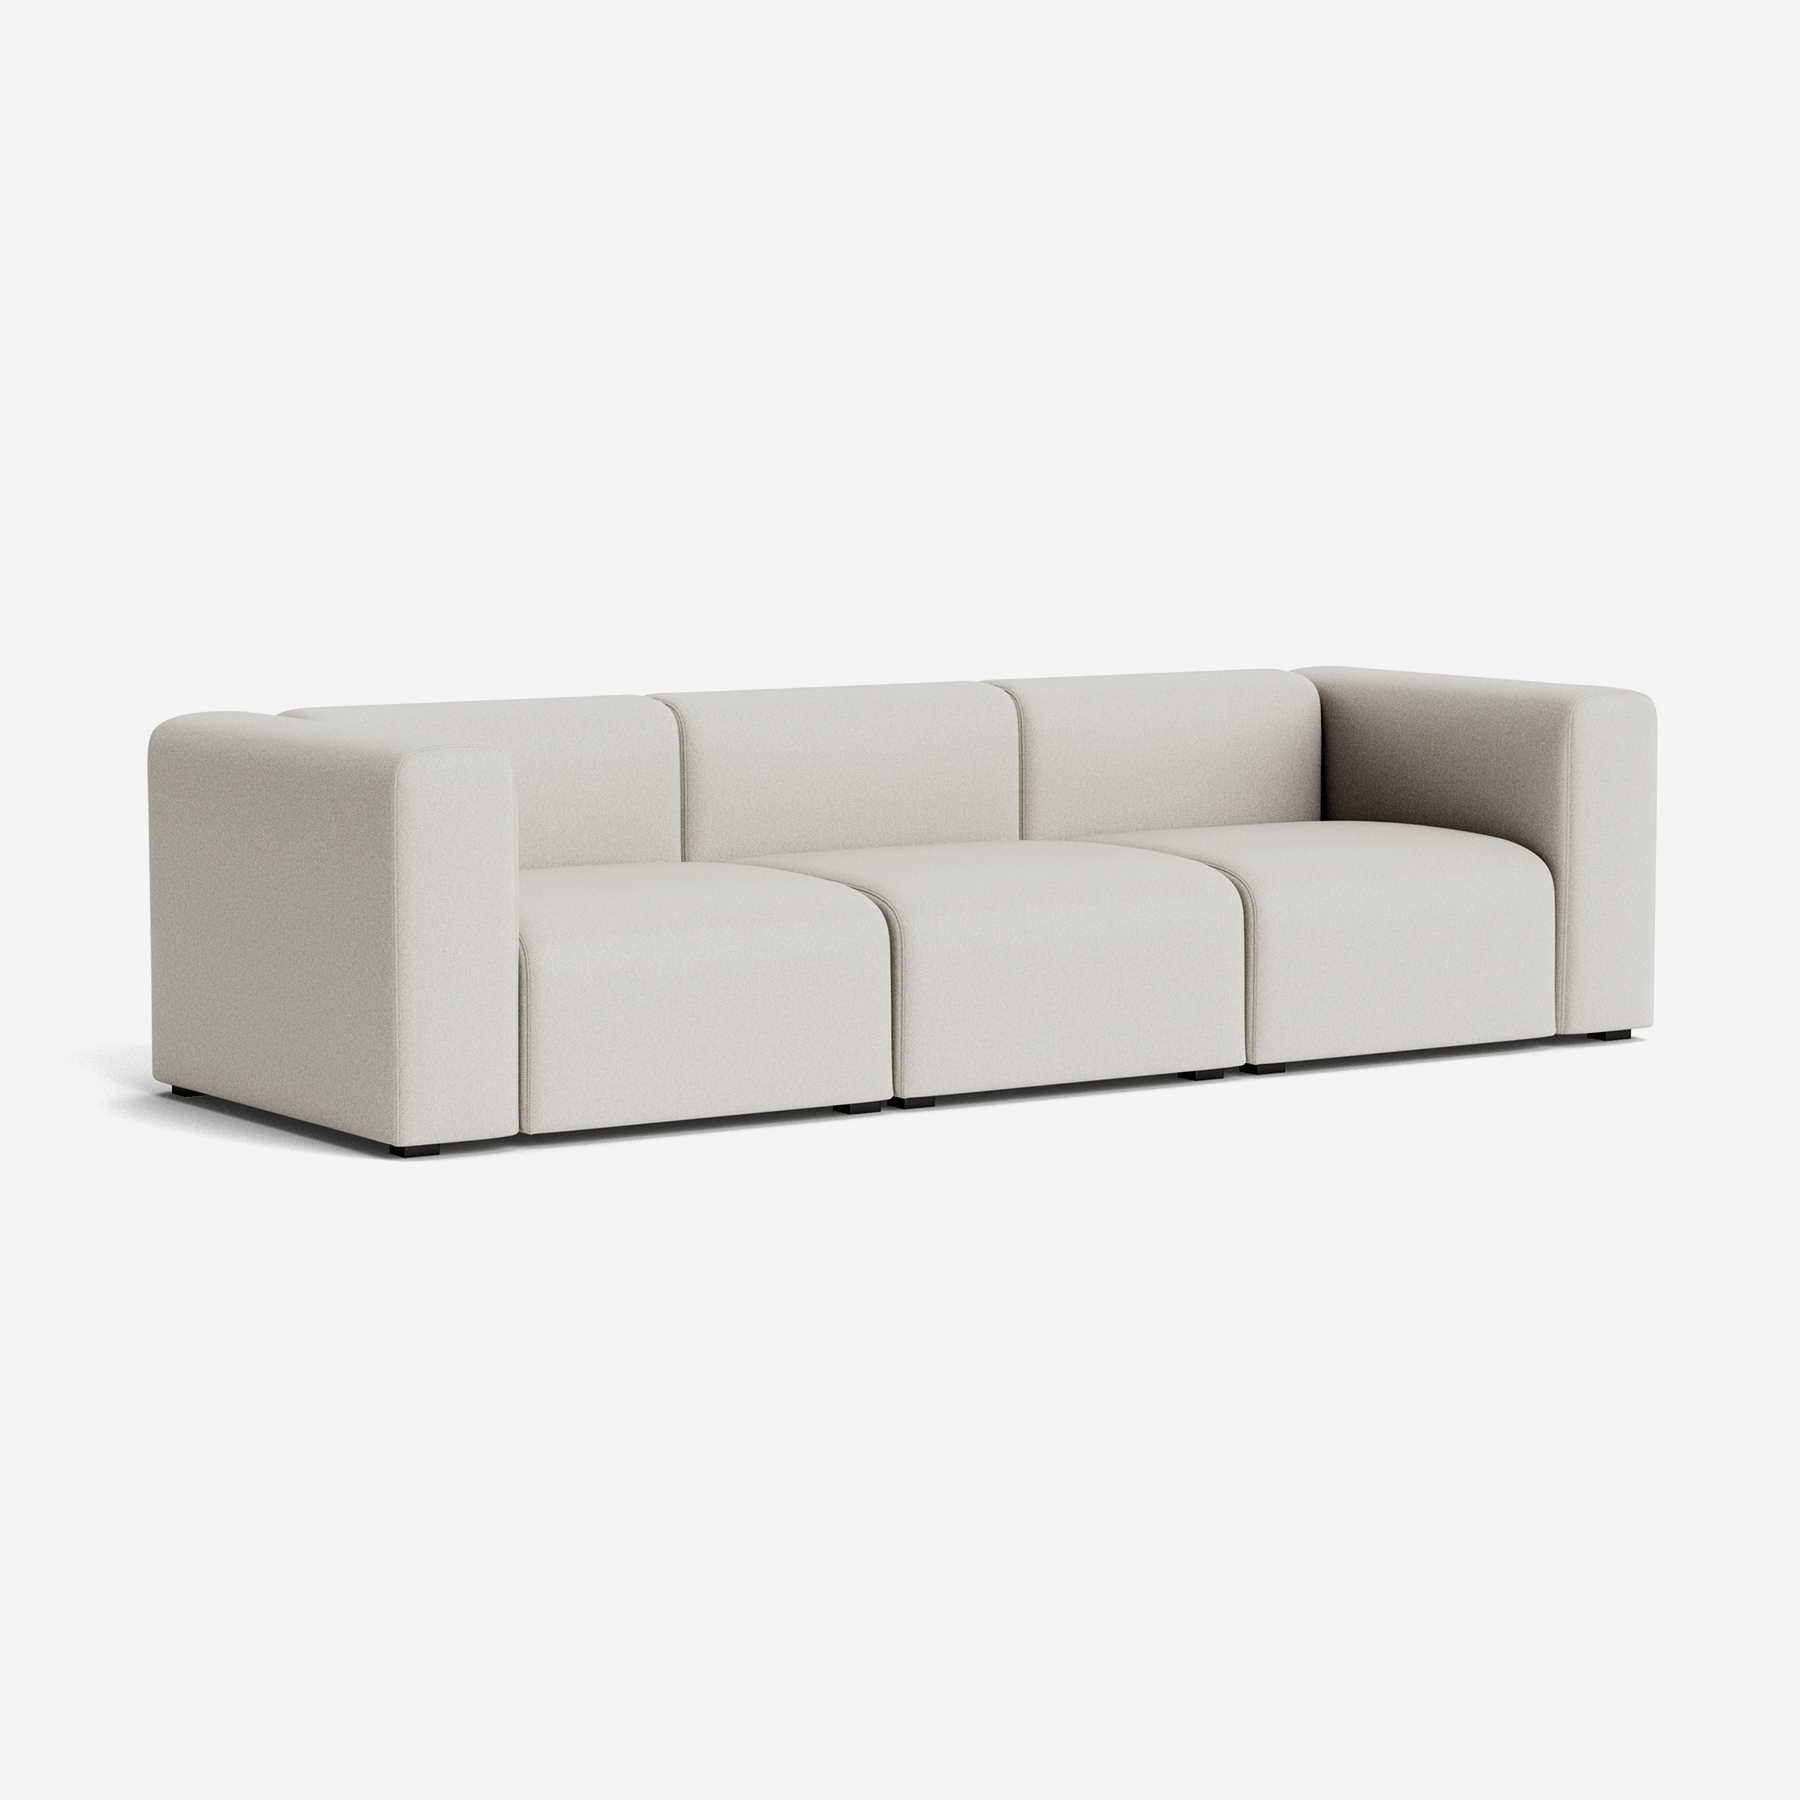 Mags 3 Seater Sofa, Combination 1